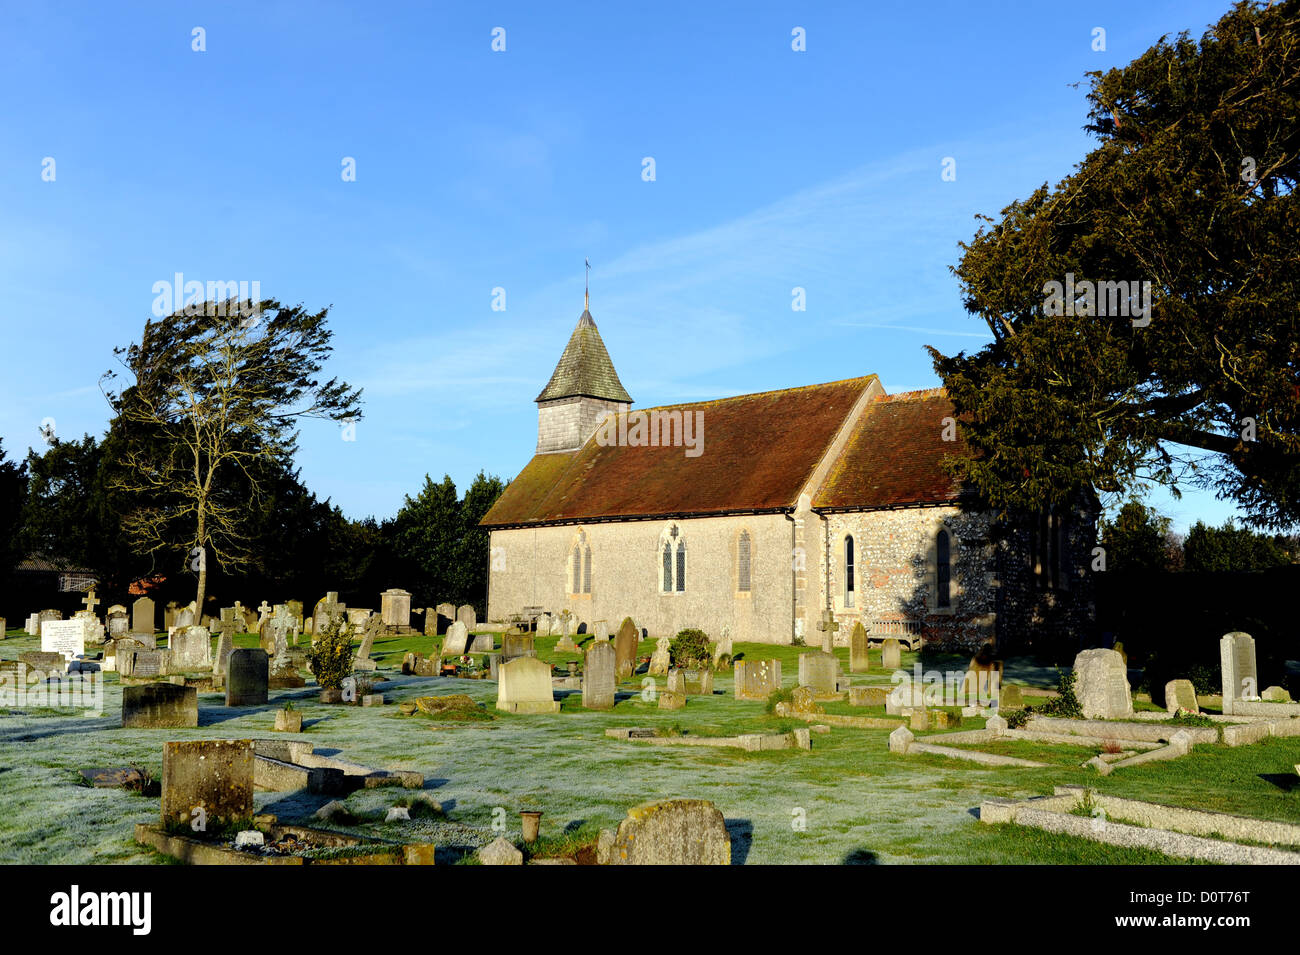 St George's Church and graveyard in Eastergate near Chichester West Sussex UK Stock Photo